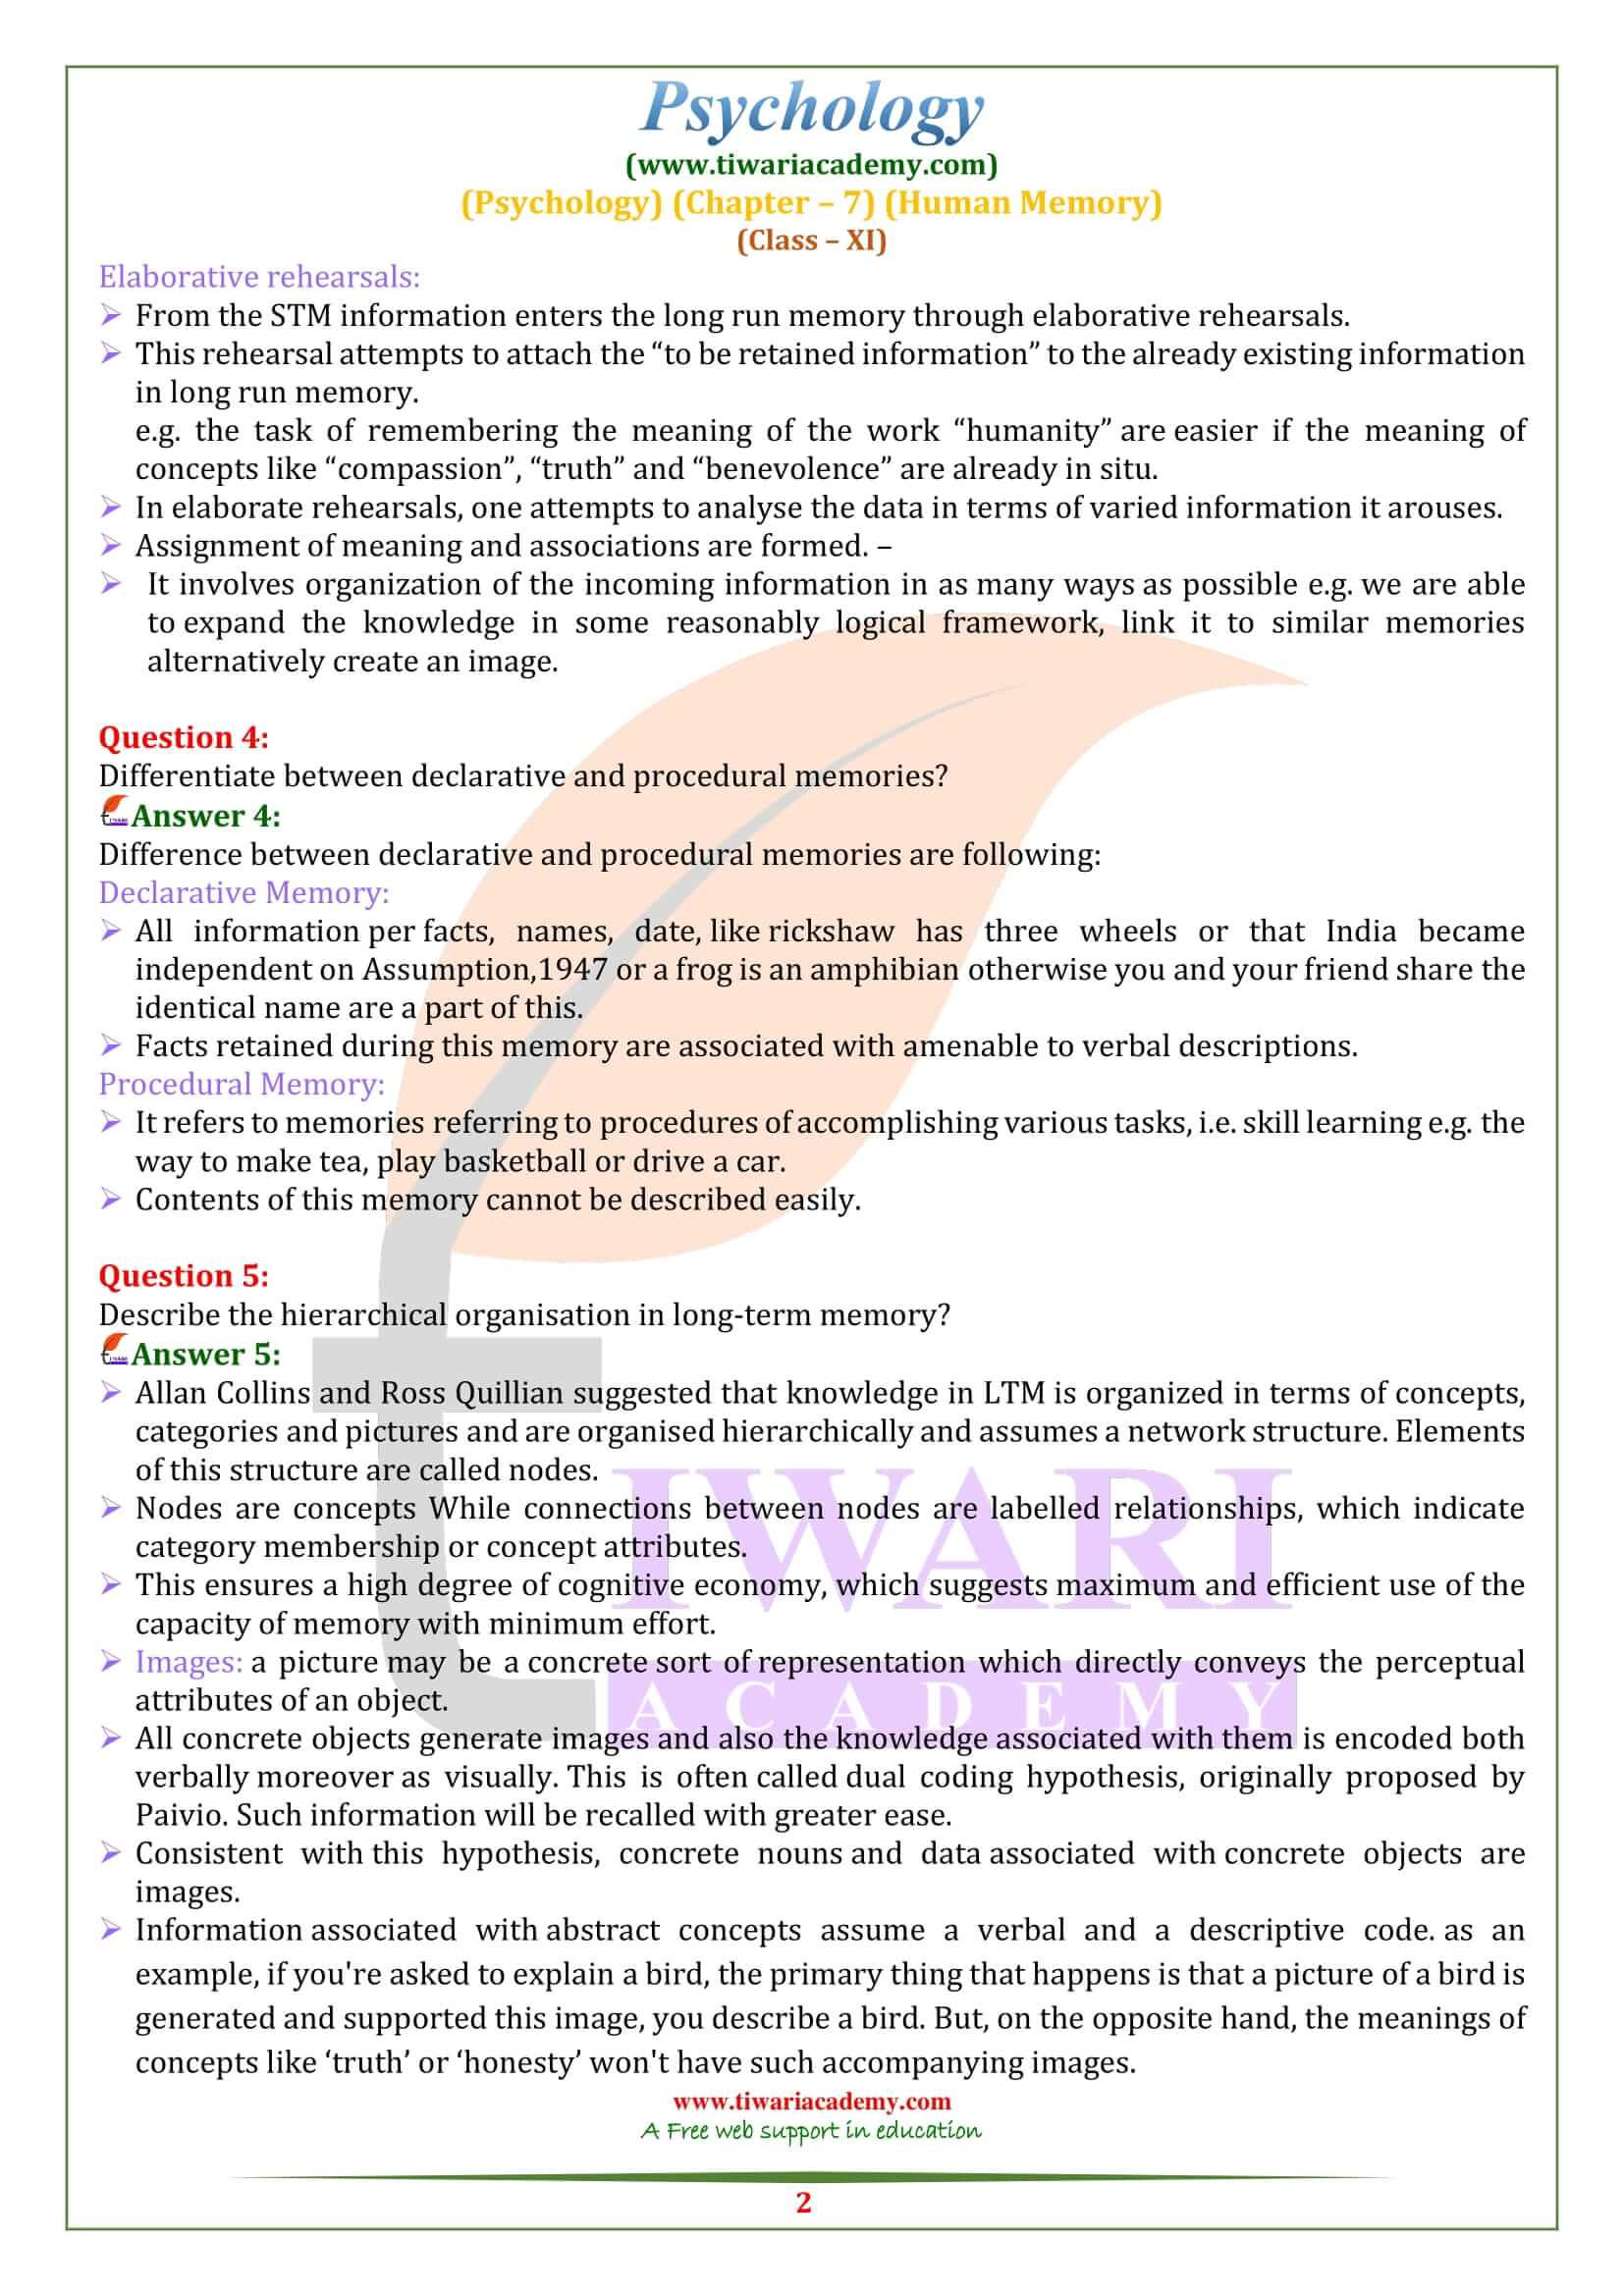 NCERT Solutions for Class 11 Psychology Chapter 7